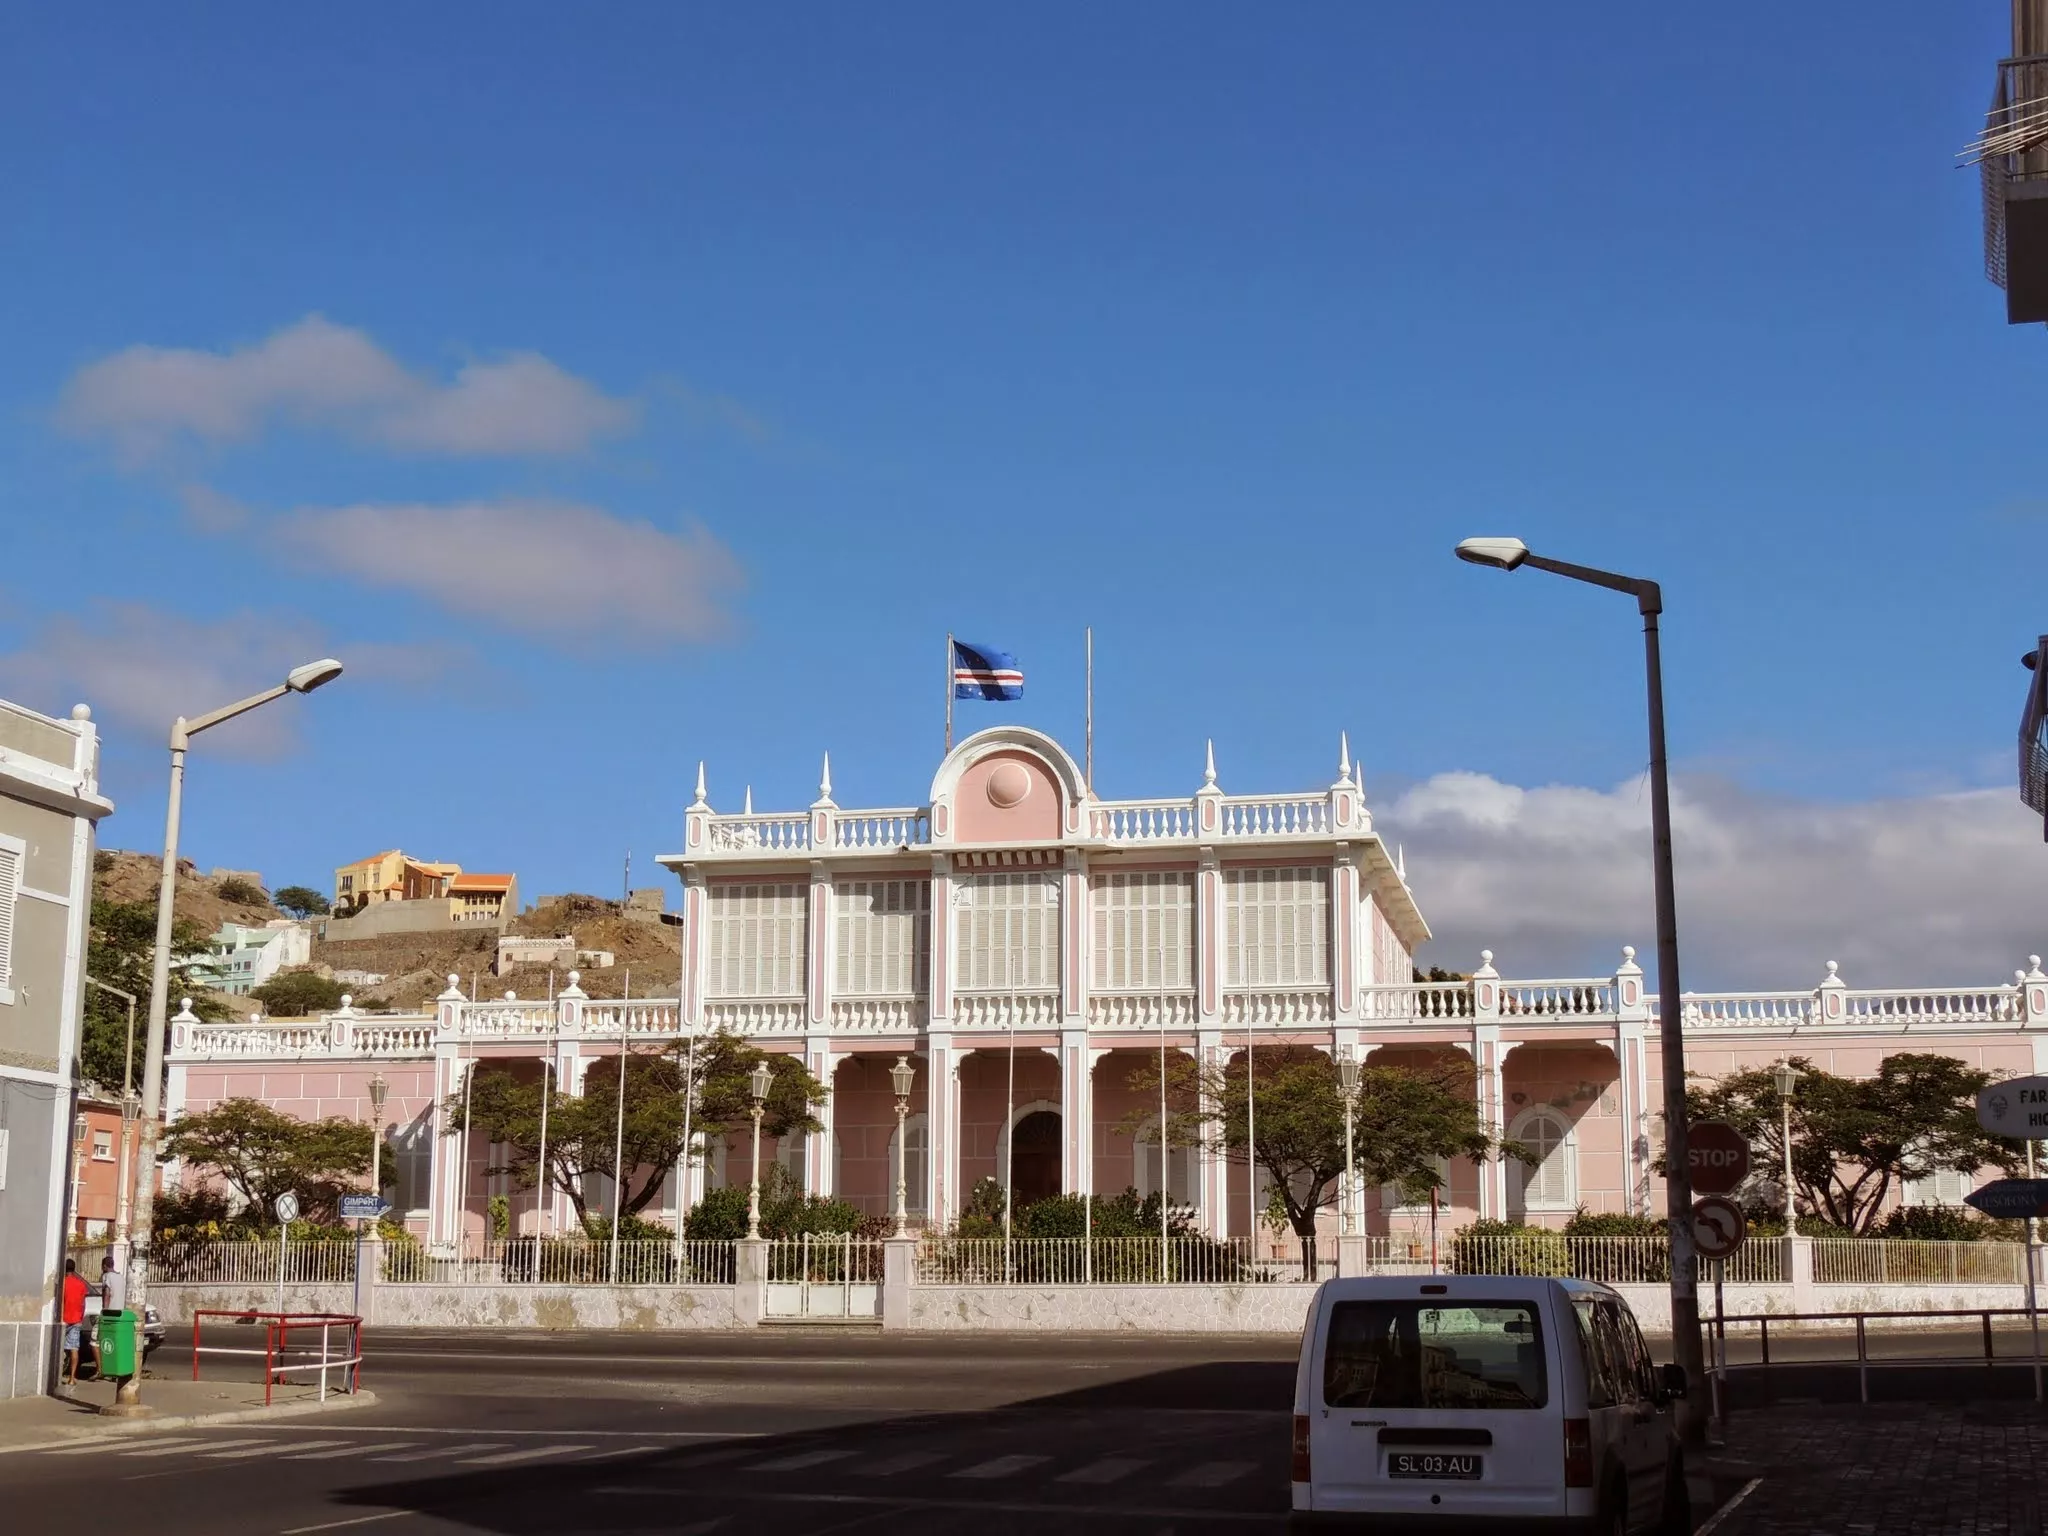 People's Palace in Cape Verde, Africa | Architecture,Art Galleries - Rated 3.4